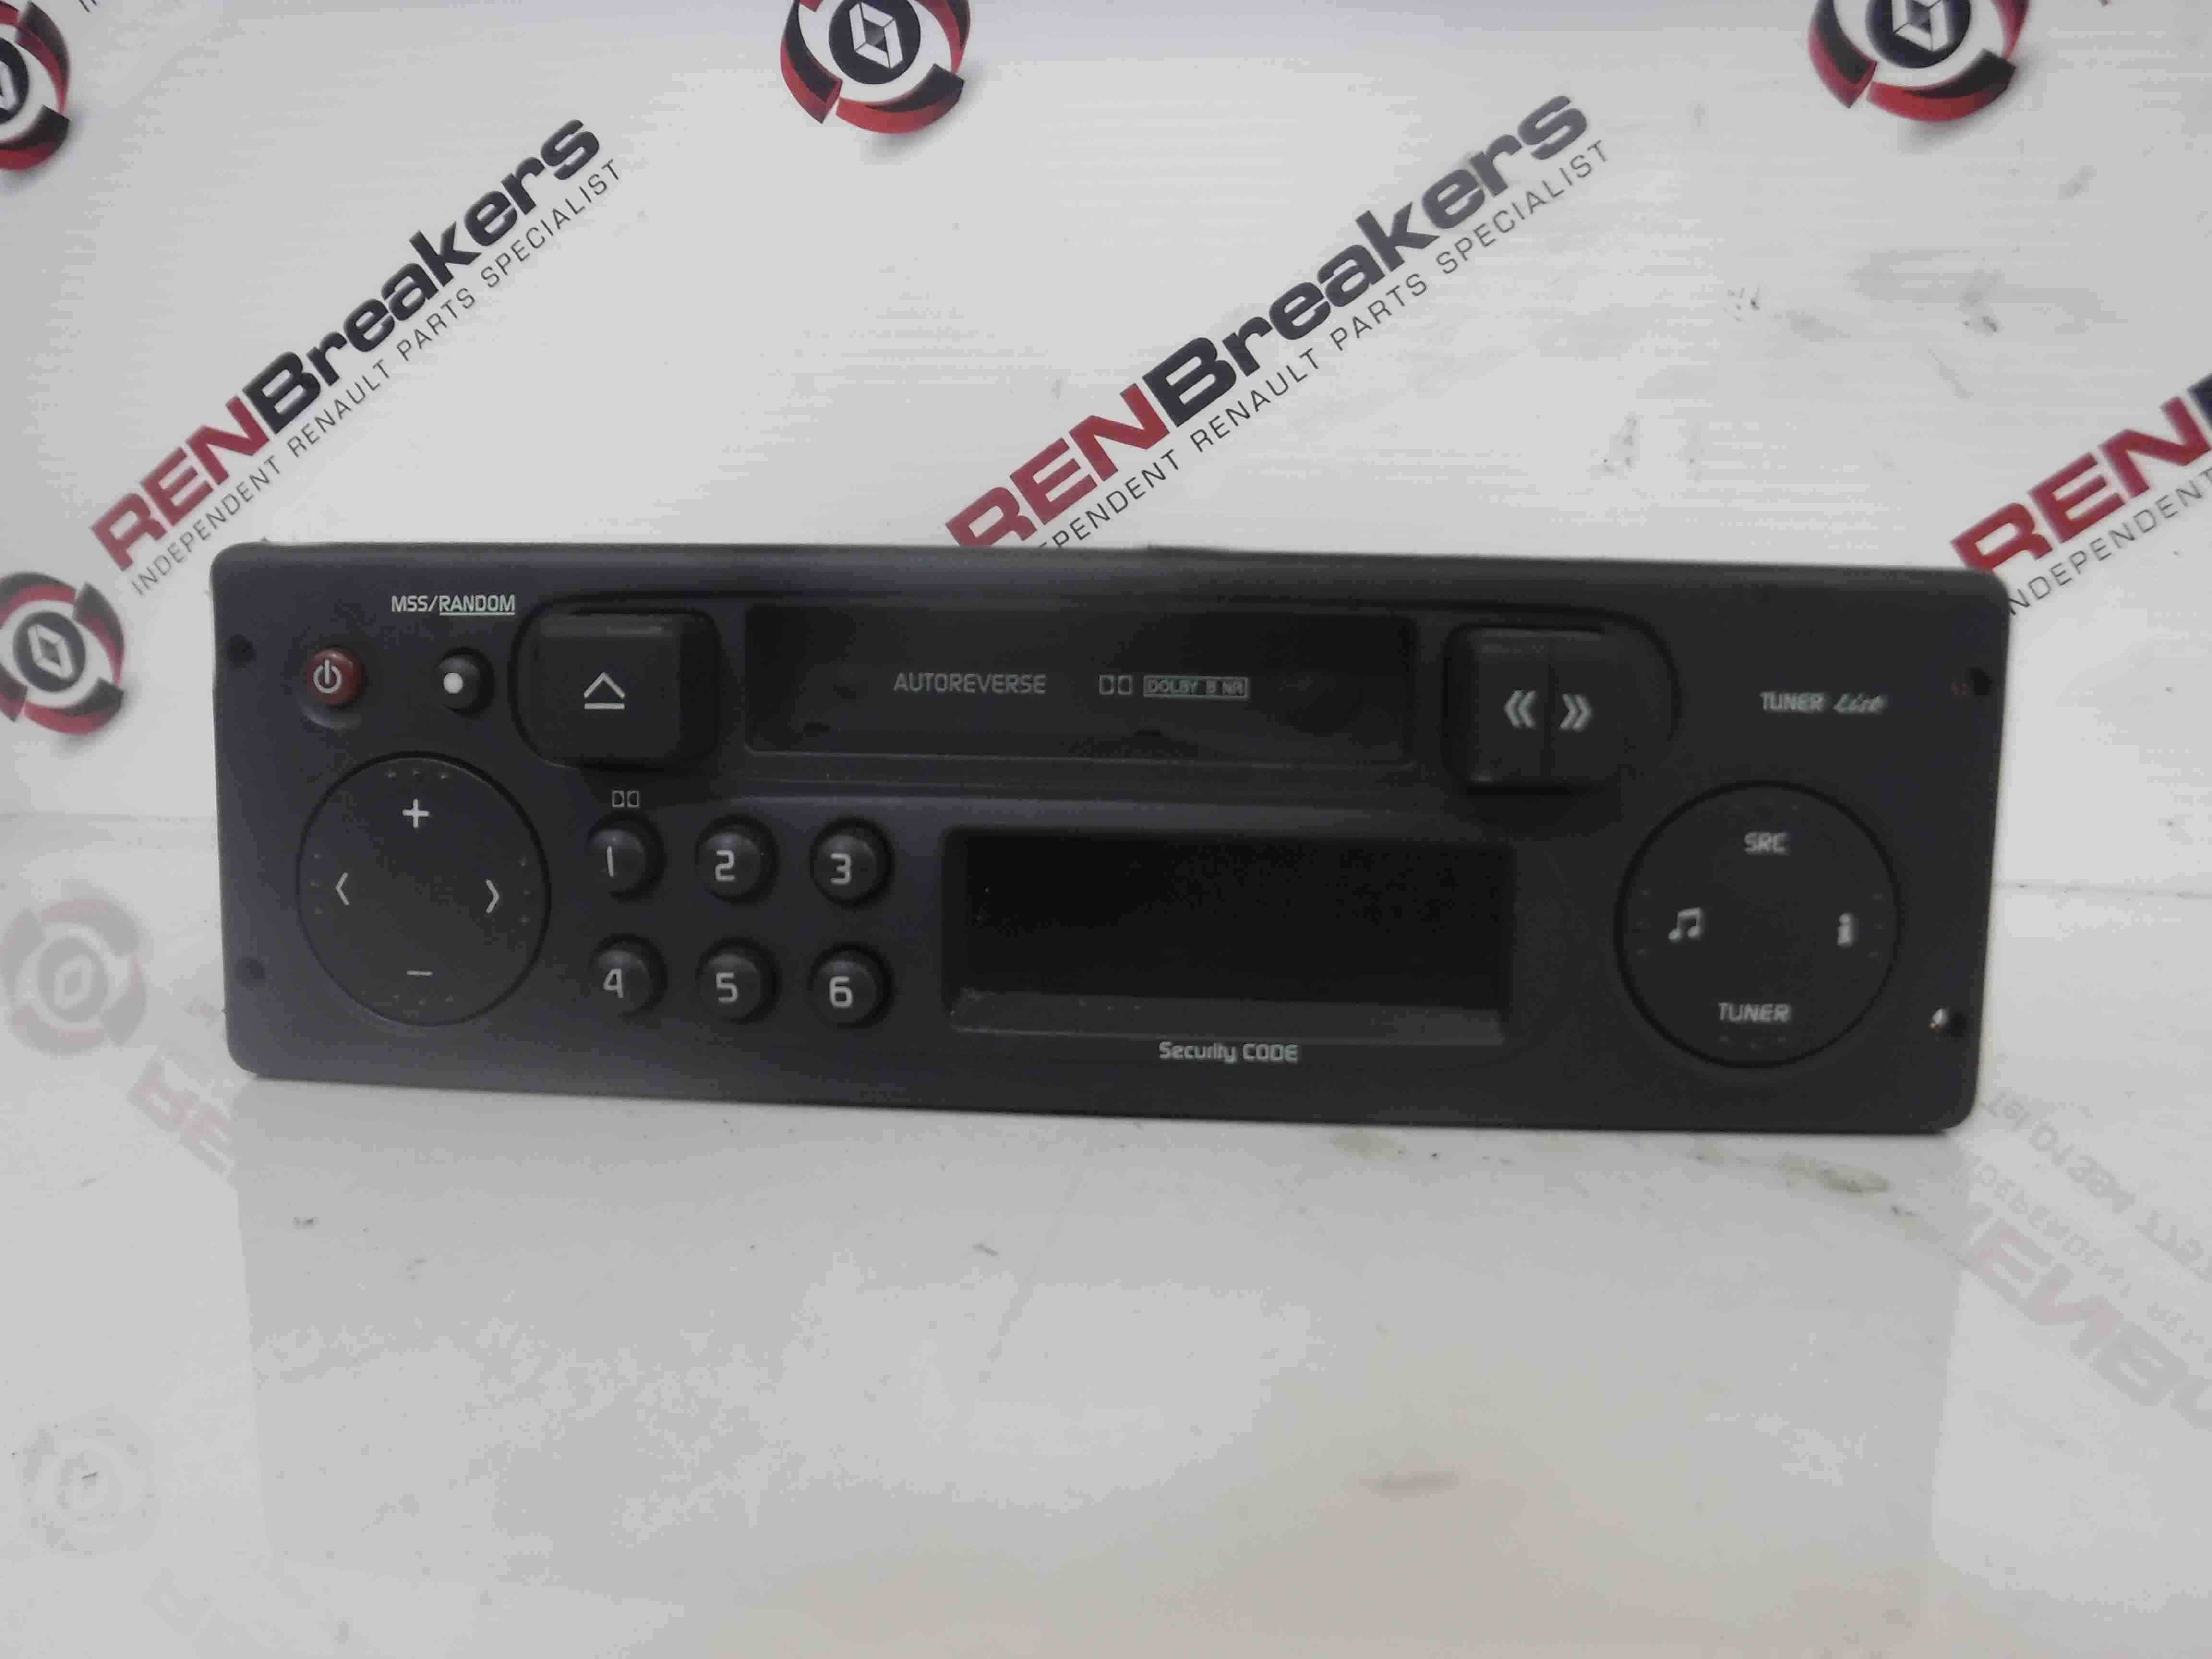 Renault Clio MK2 2001-2006 Radio Tape Casette Player Code 8200113800 - Store - Renault Breakers - Used Renault Car Parts & Specialist